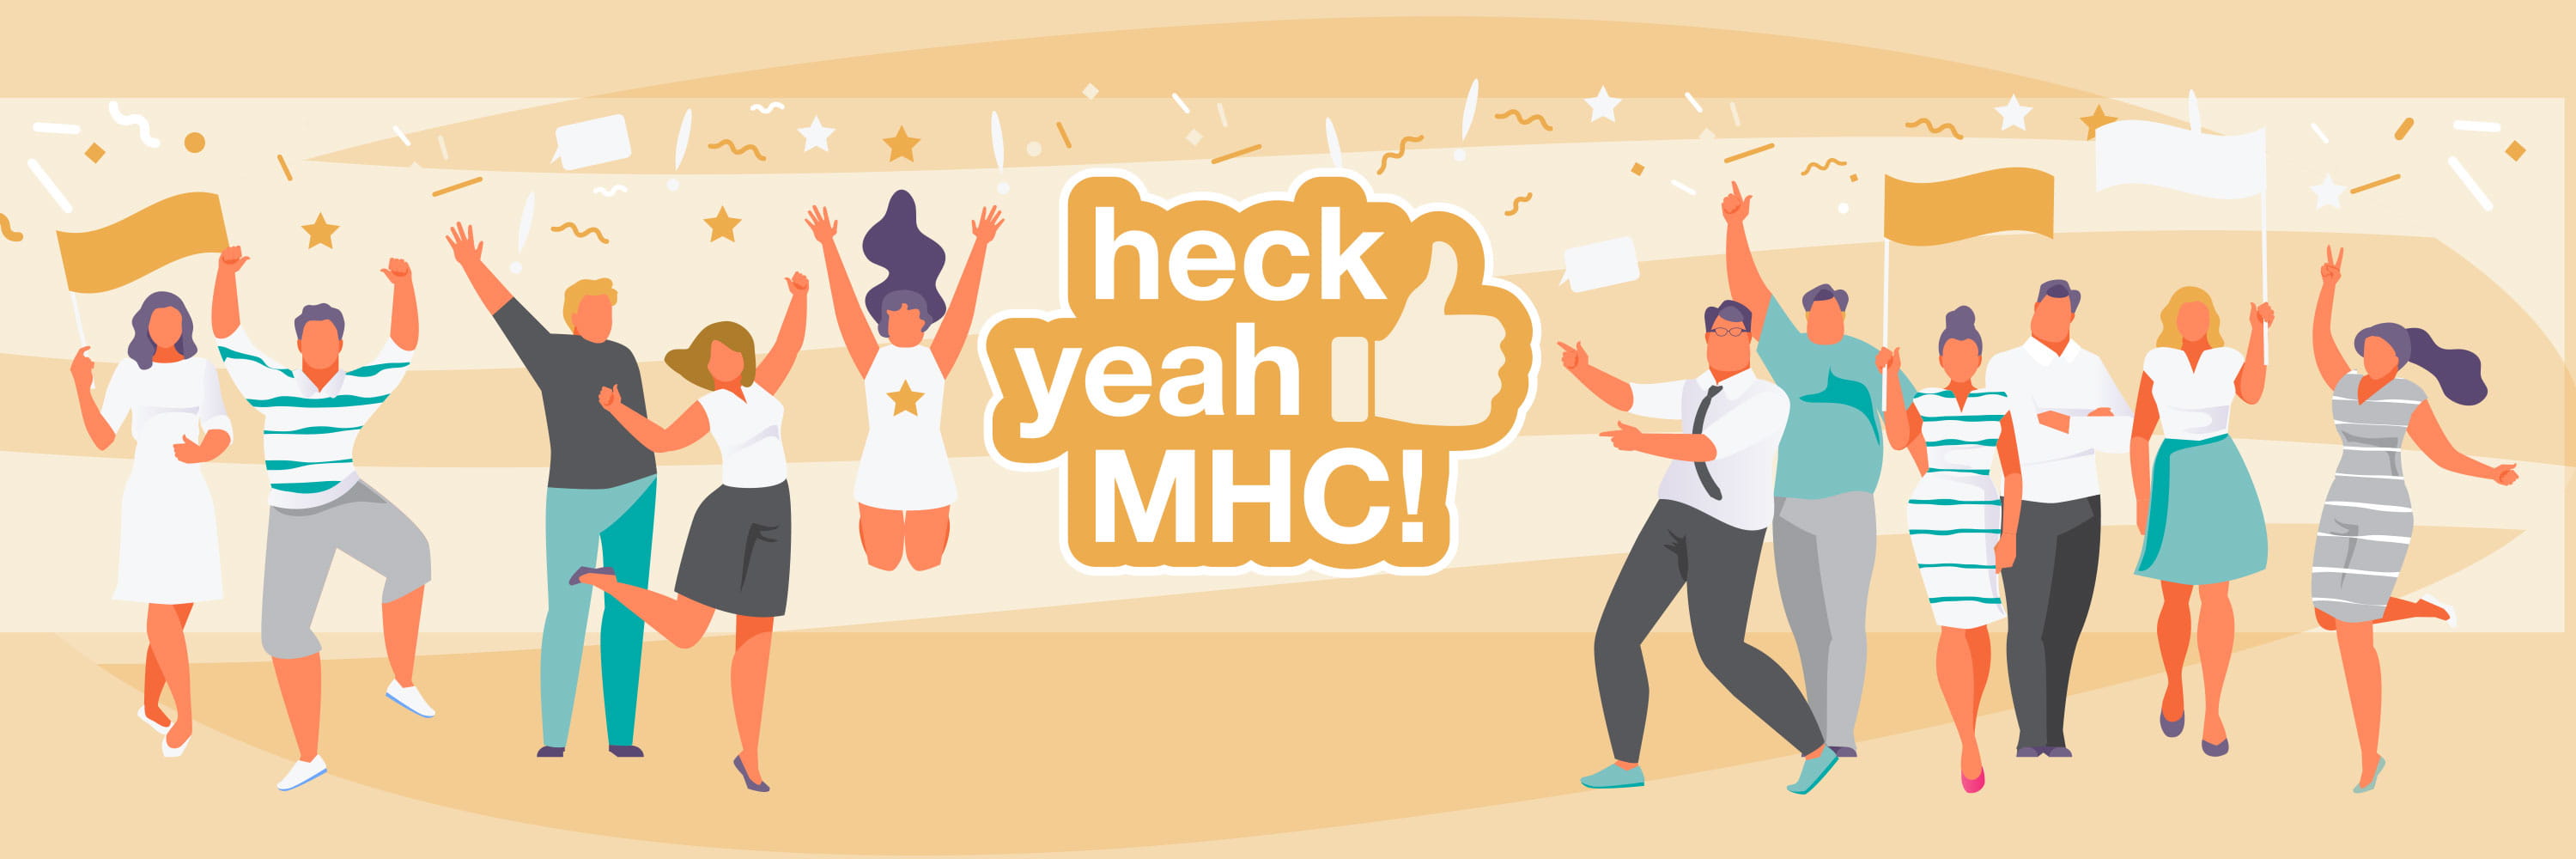 Illustration of people celebrating, Heck Yeah MHC text